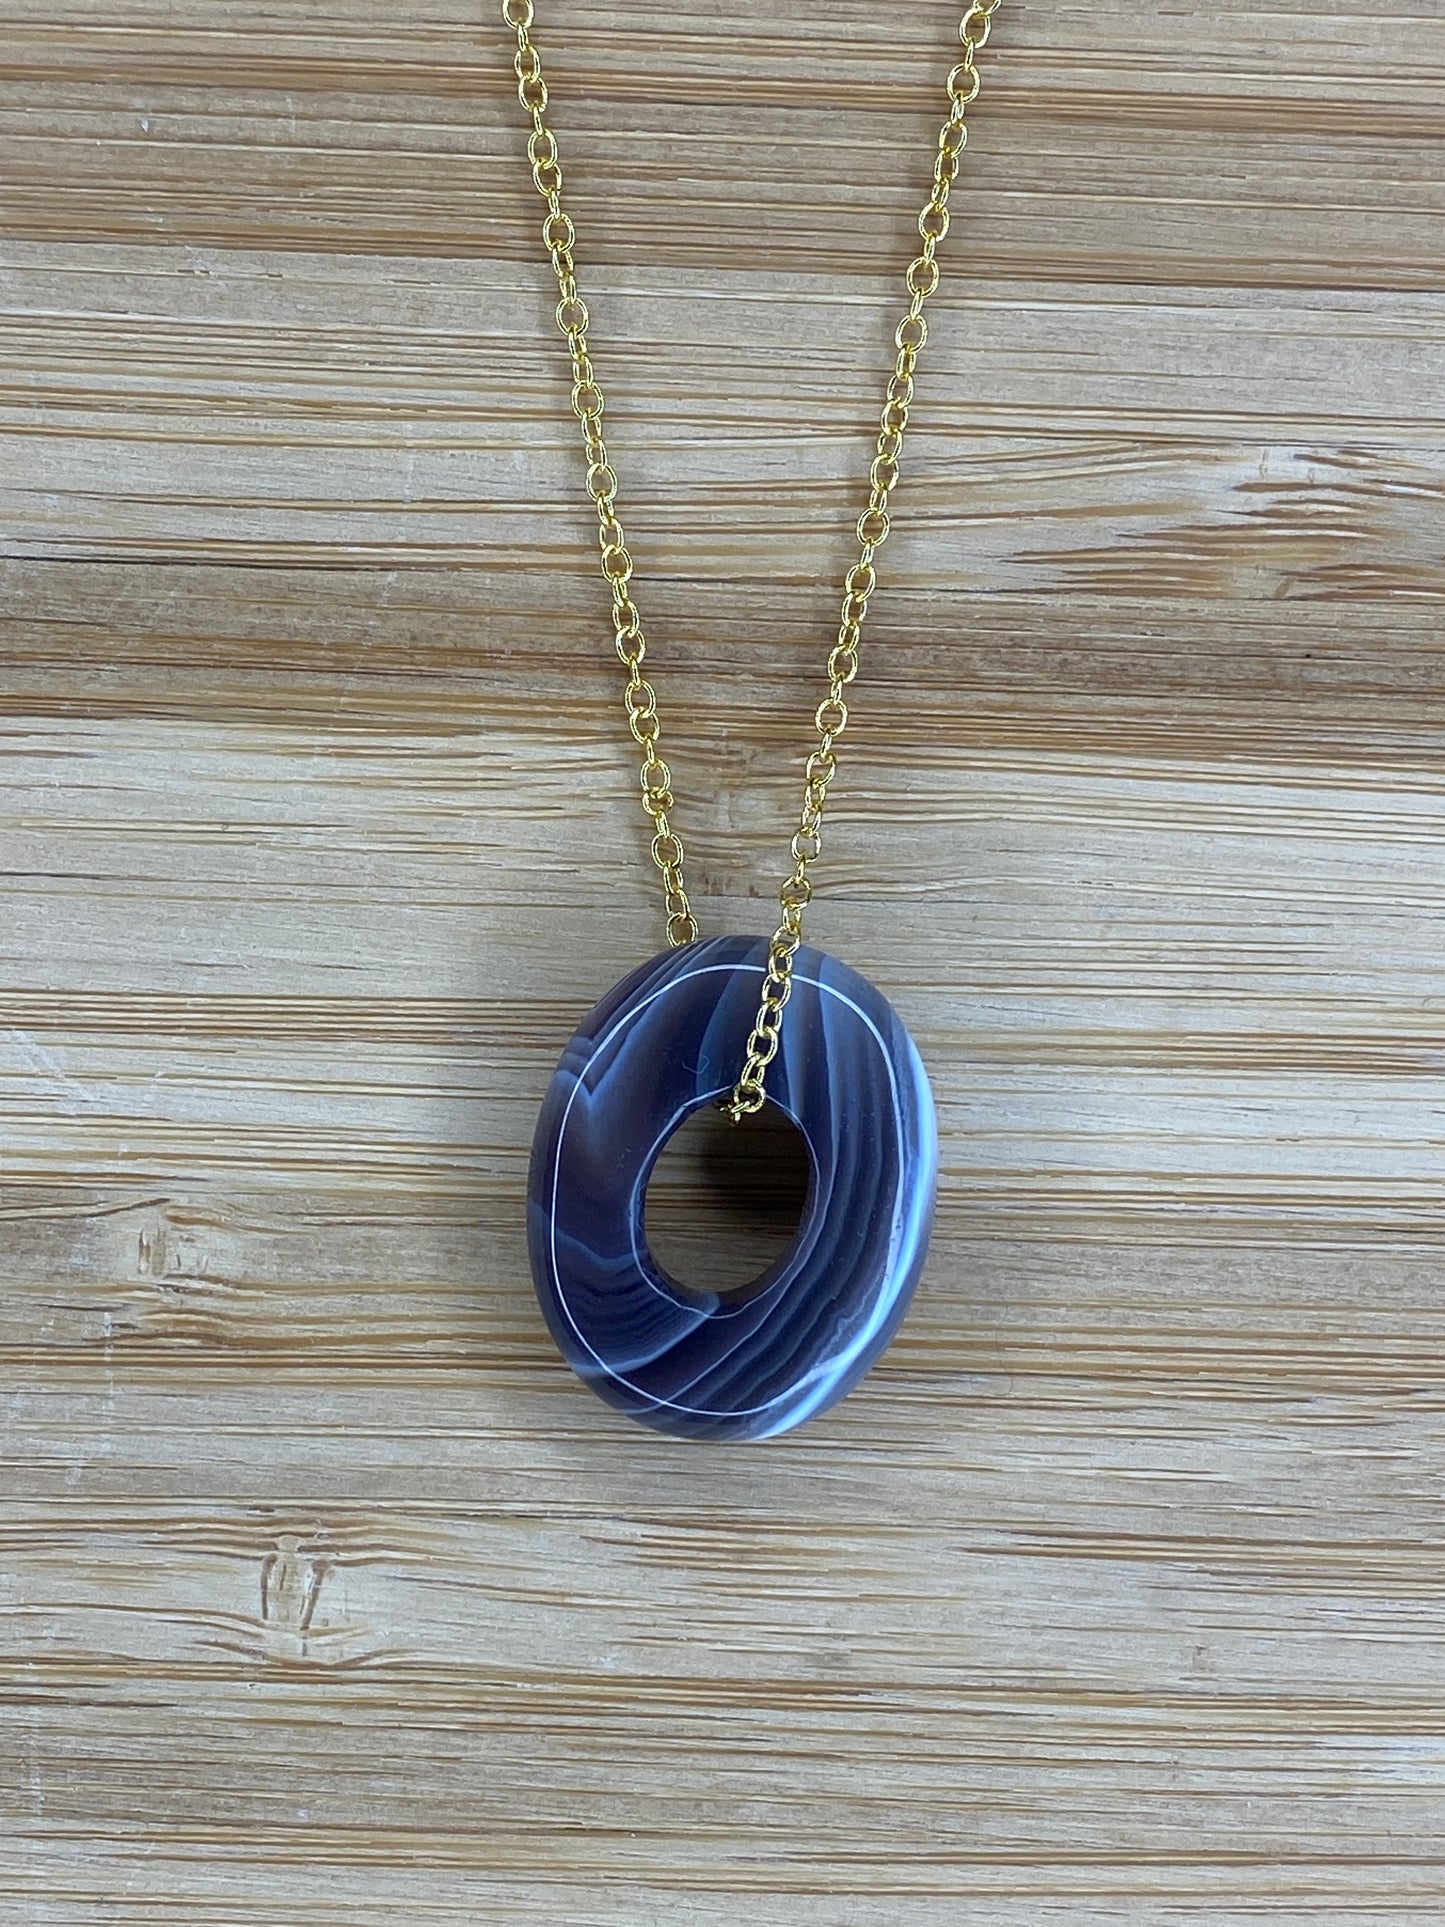 BANDED BOTSWANAN AGATE 20IN GOLD PLATED NECKLACE